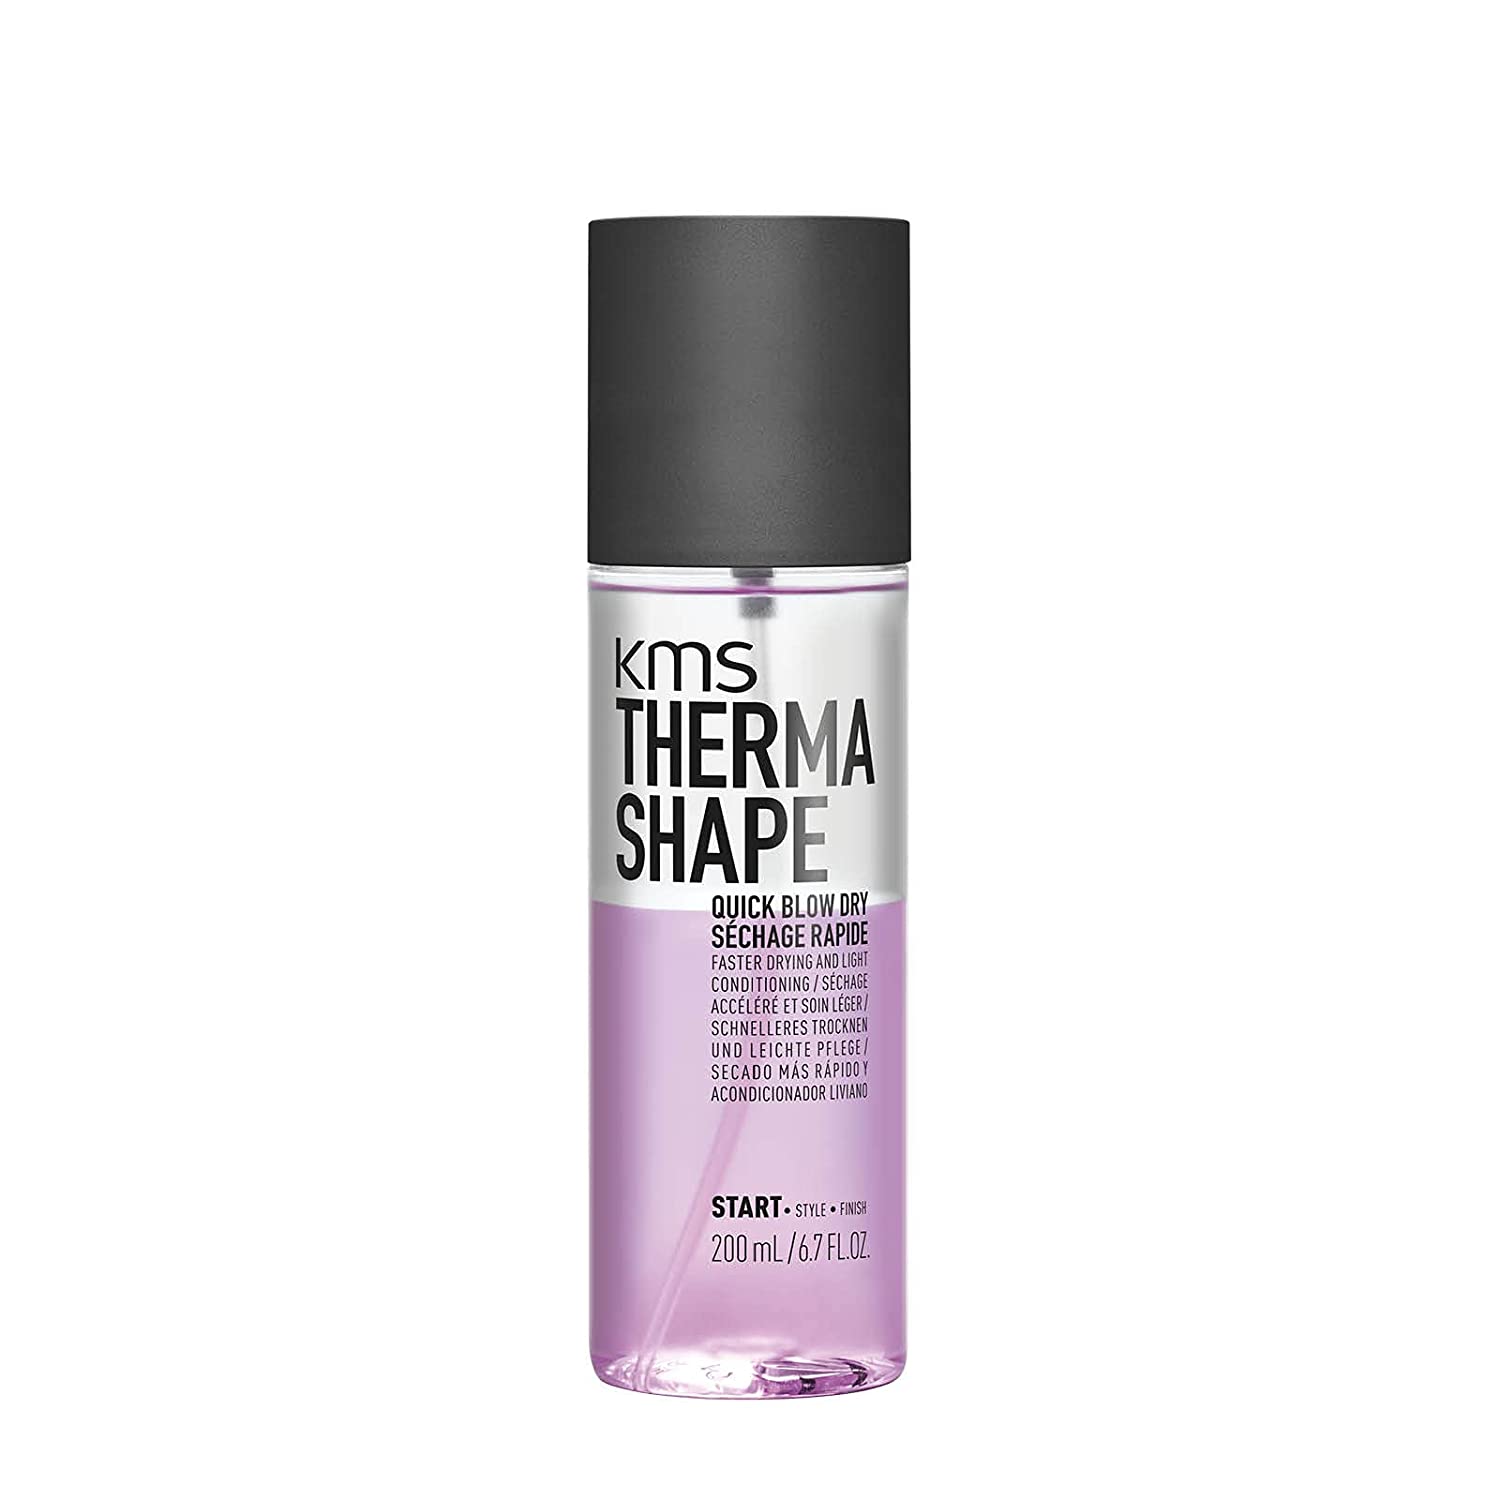 KMS THERMASHAPE Quick Blow Dry Spray for Full, Natural [...]